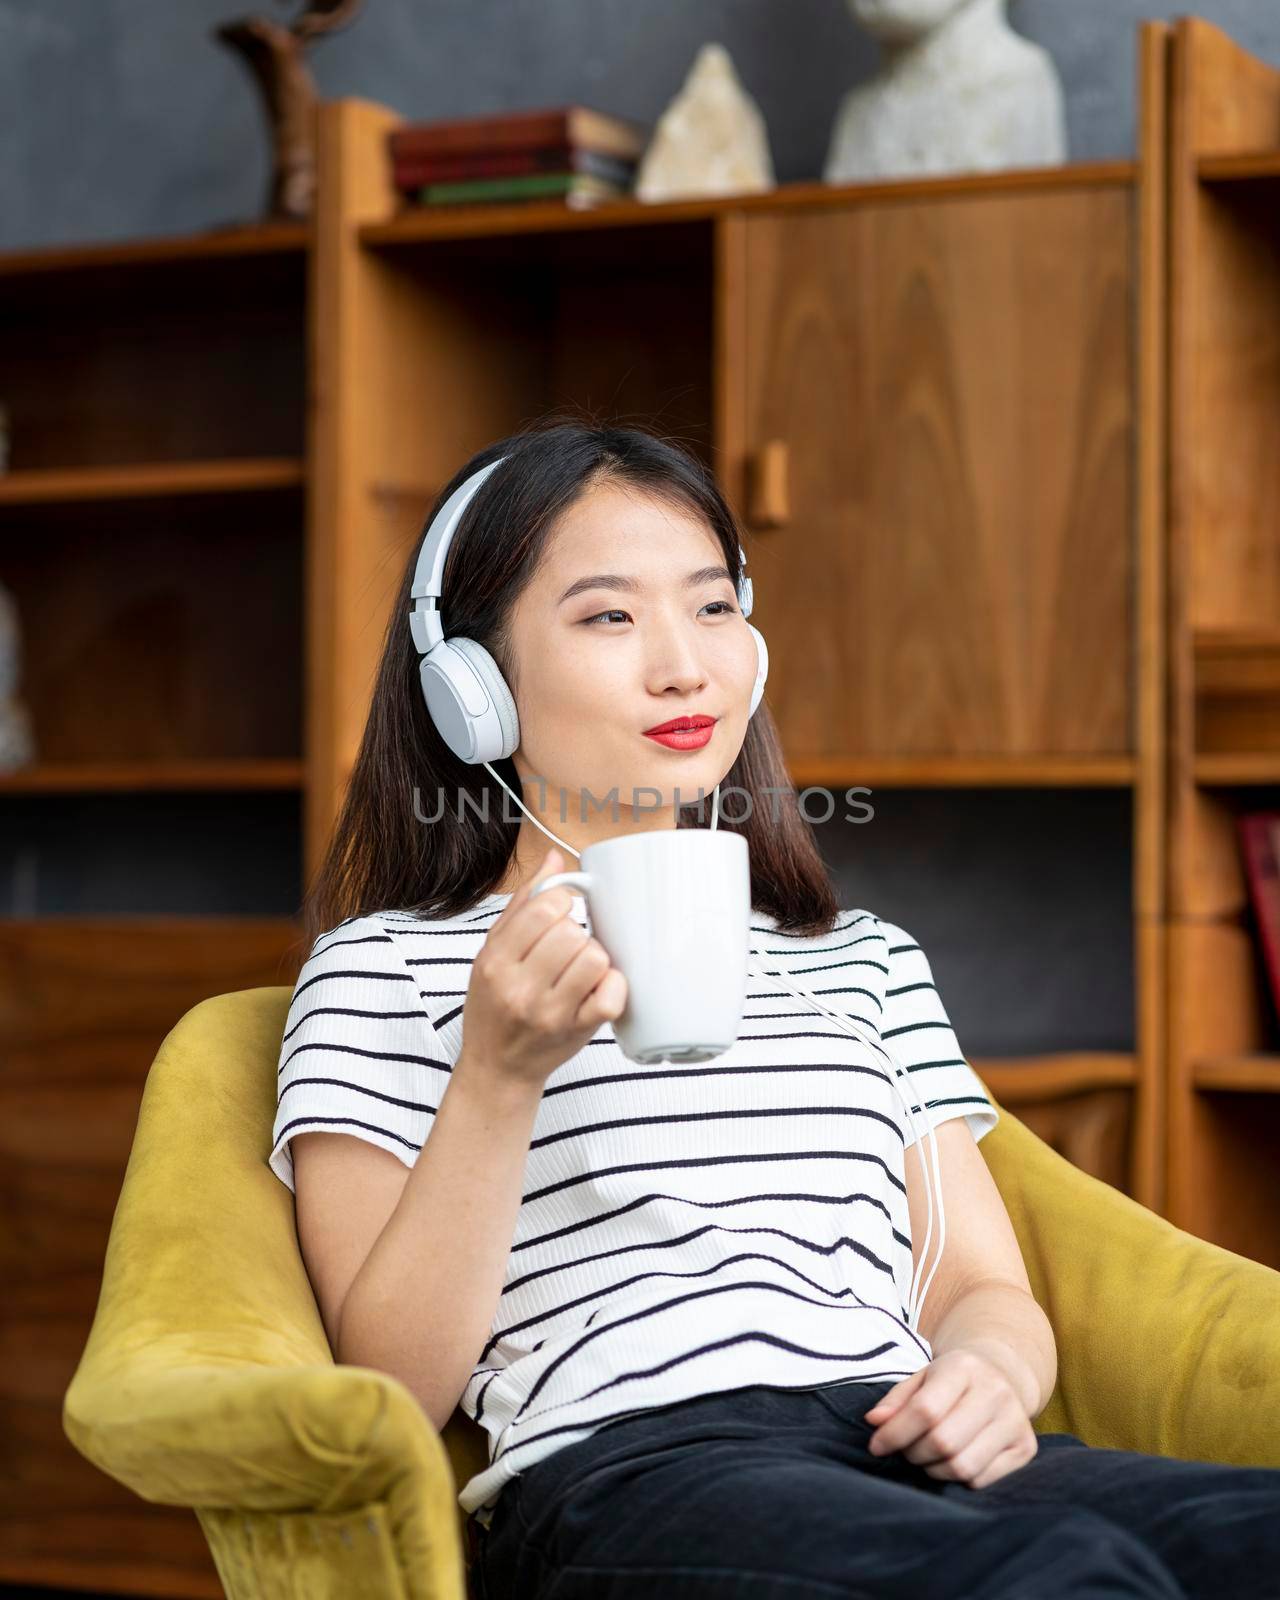 Young beautiful Asian girl listening to music with headphones sitting in chair and looking out window. Woman drinking coffee from mug. Morning routine and contemplation